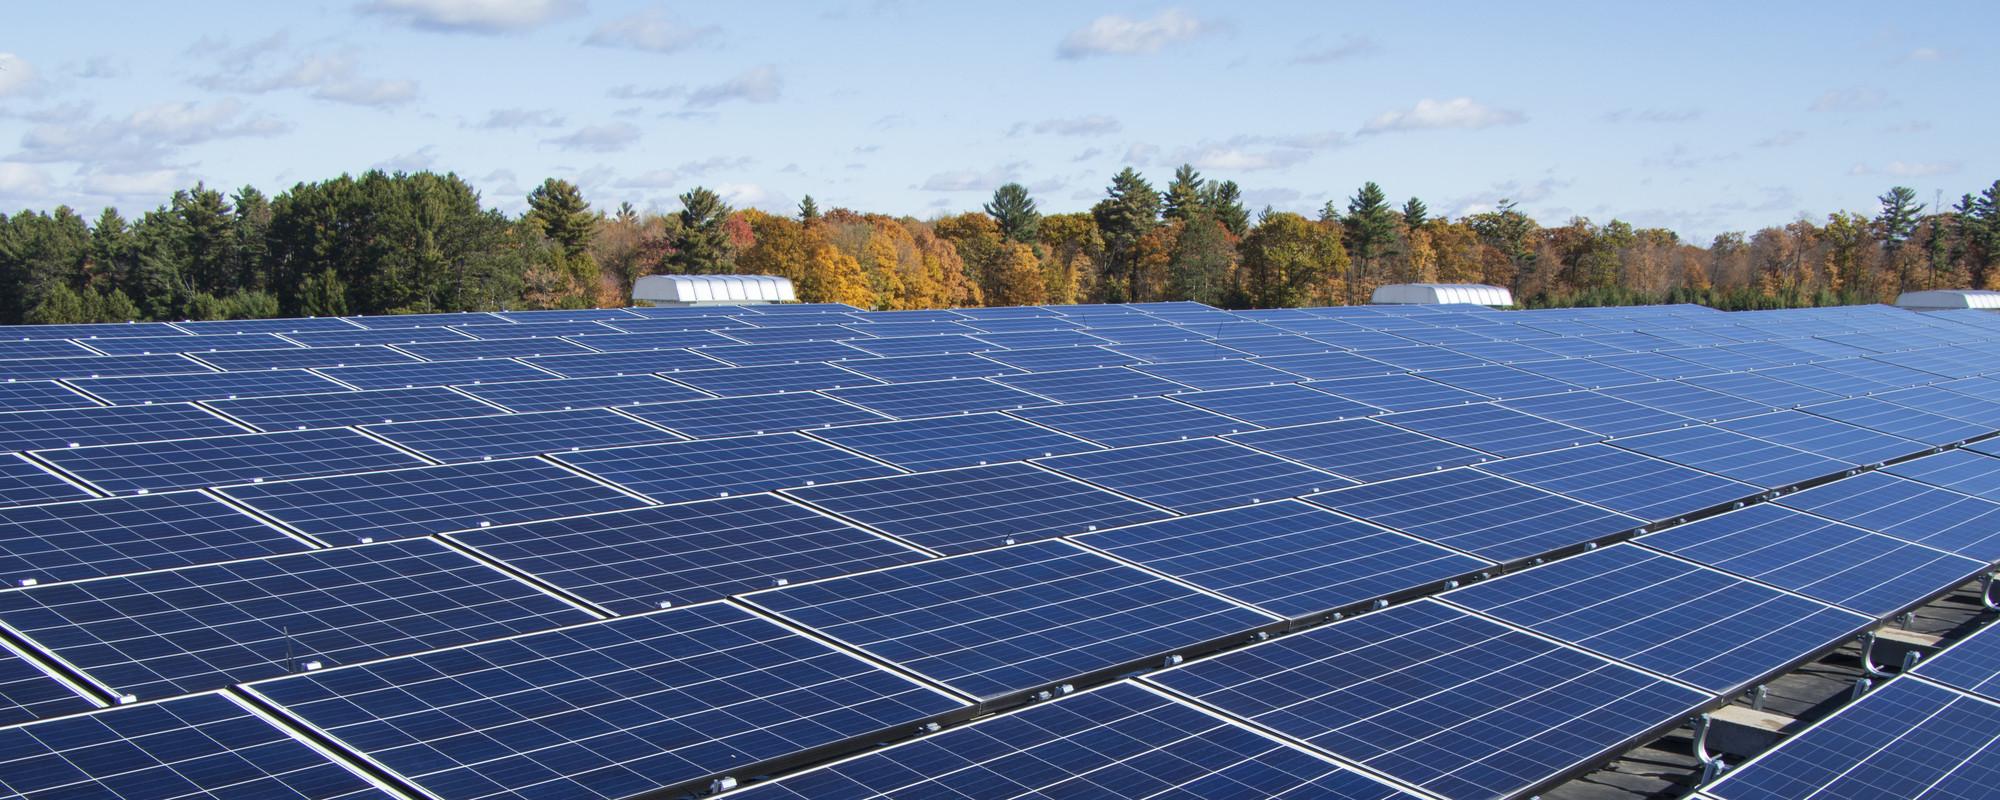 Northland Pines School District Solar Project